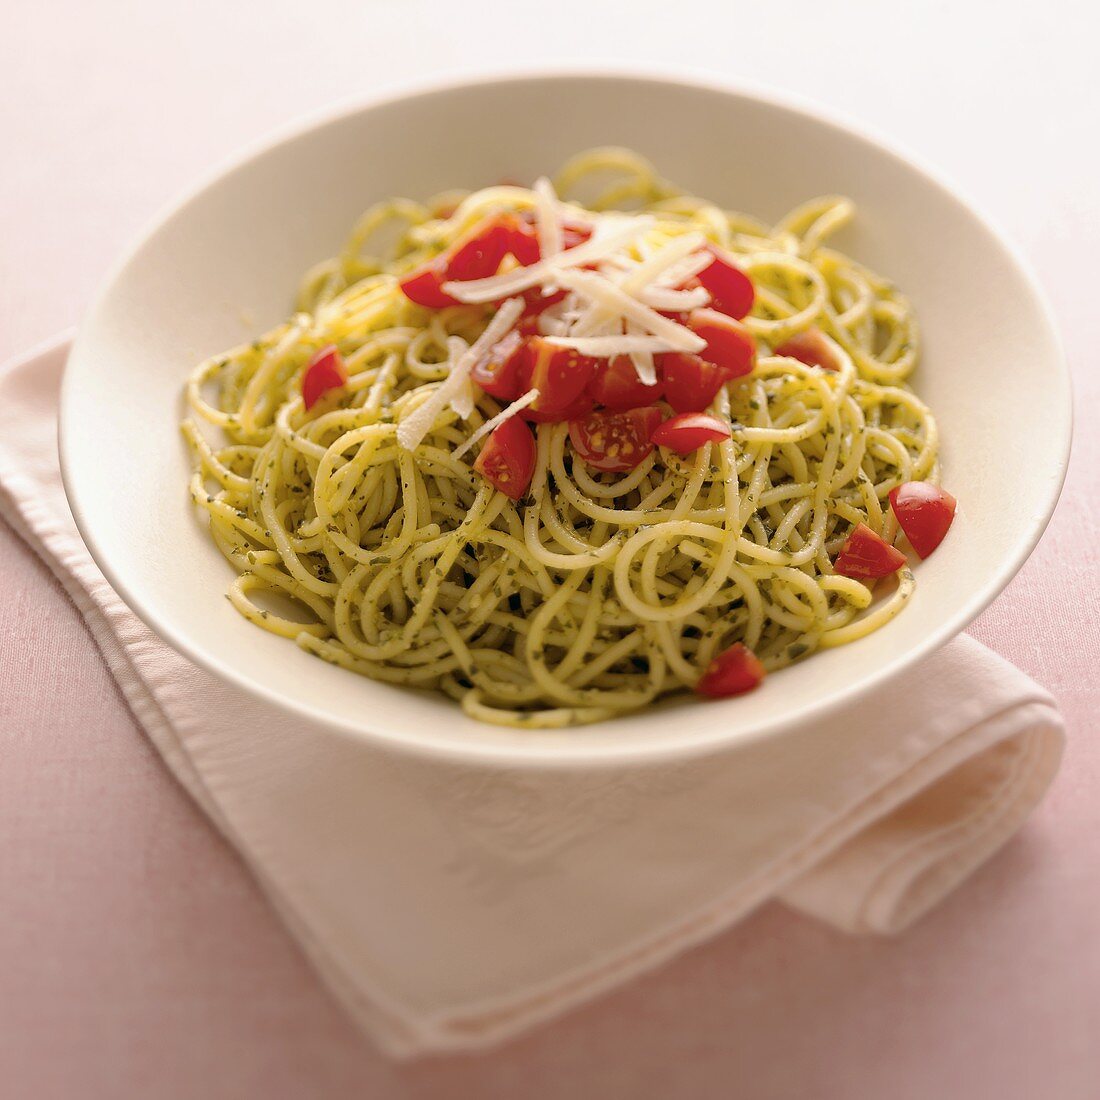 Spaghetti with Pesto, Tomatoes and Parmesan Cheese